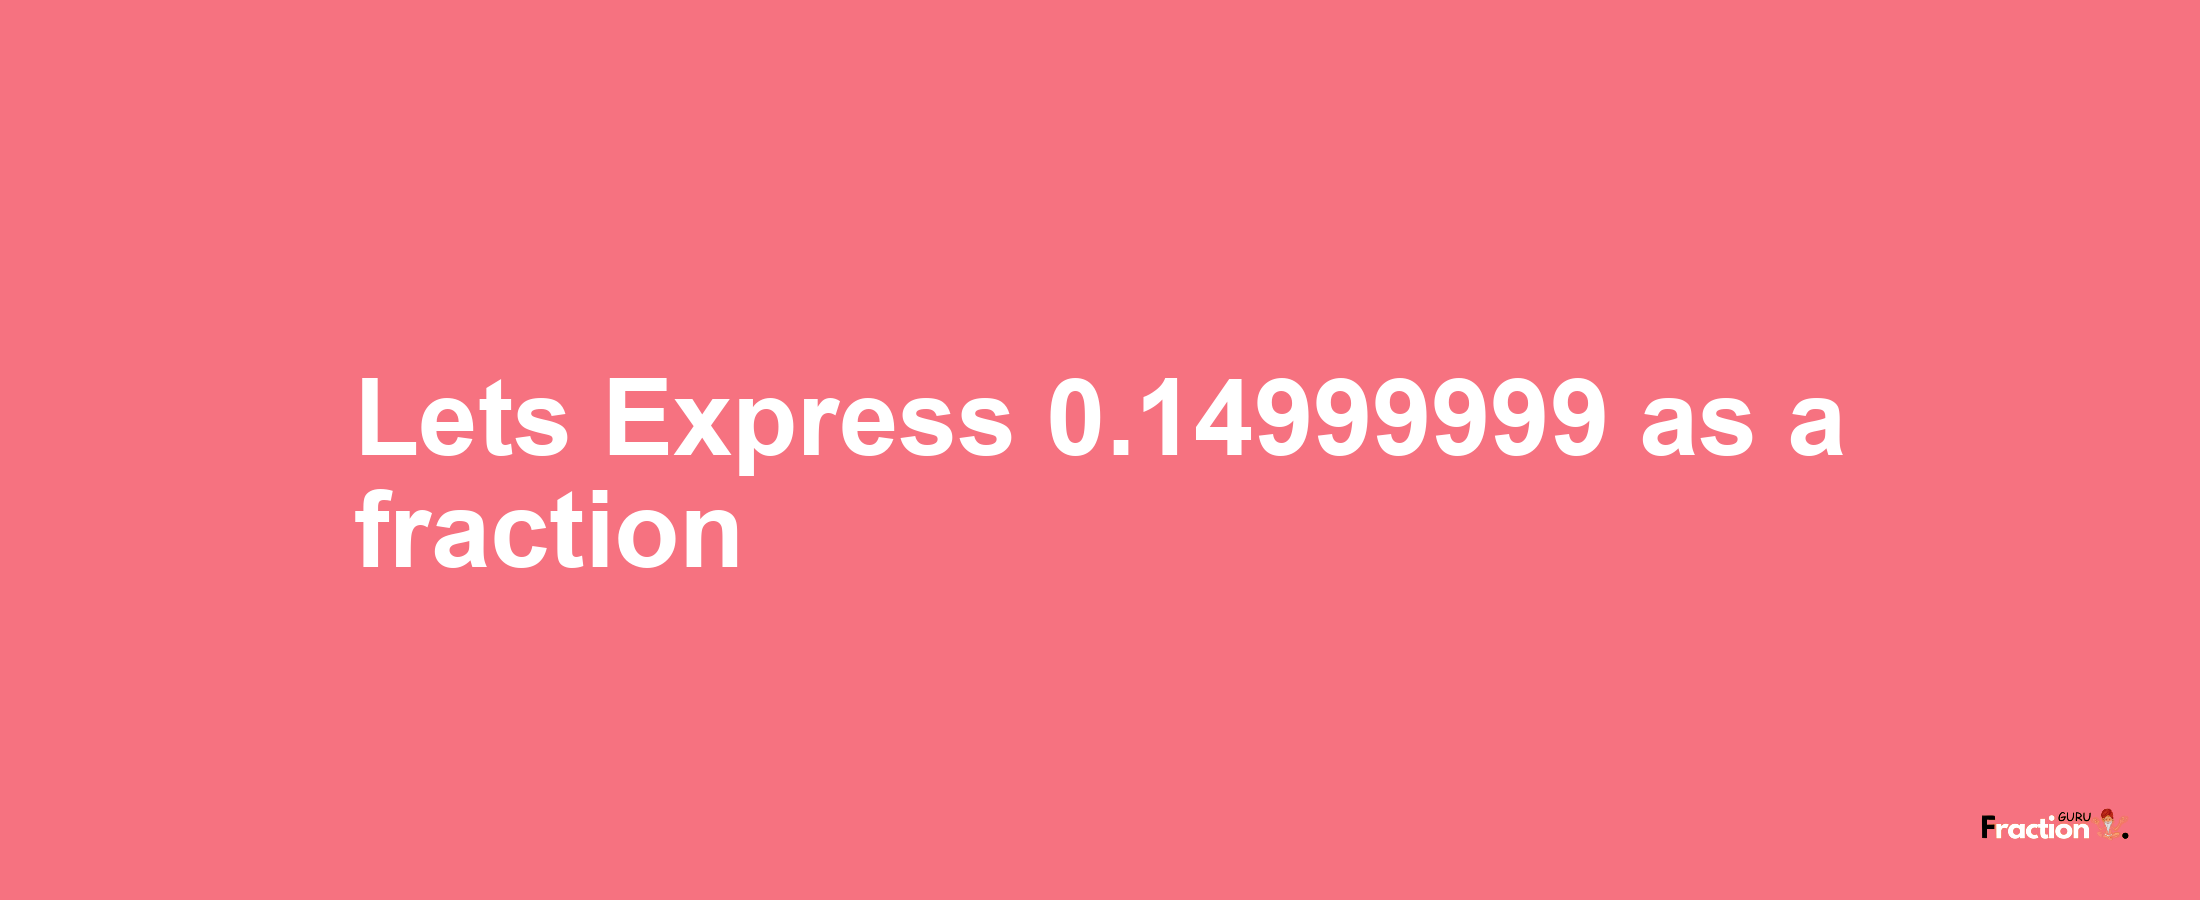 Lets Express 0.14999999 as afraction